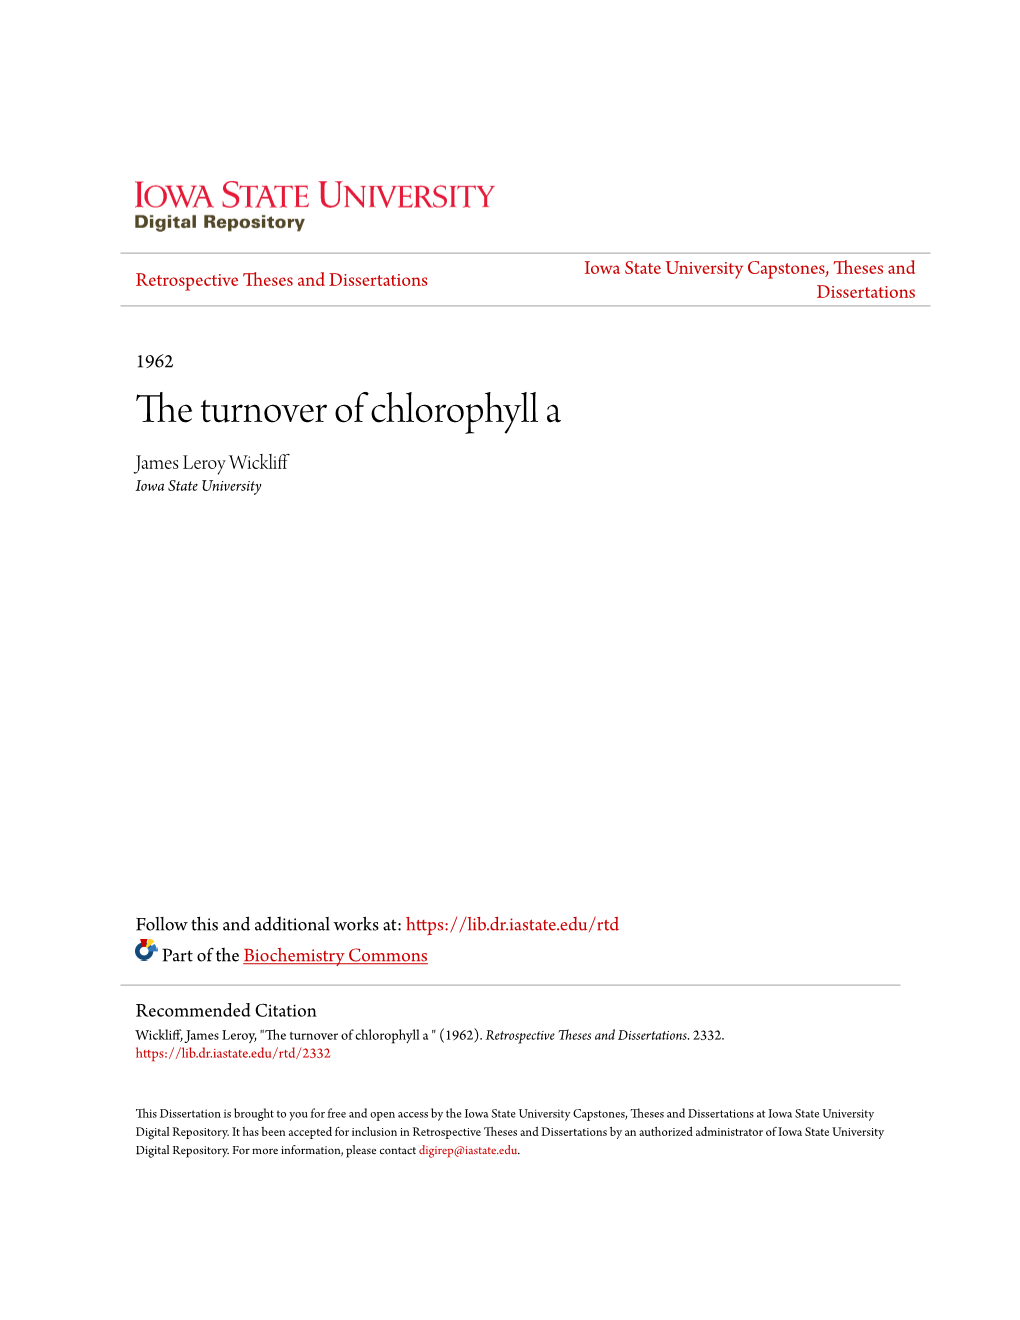 The Turnover of Chlorophyll a James Leroy Wickliff Iowa State University